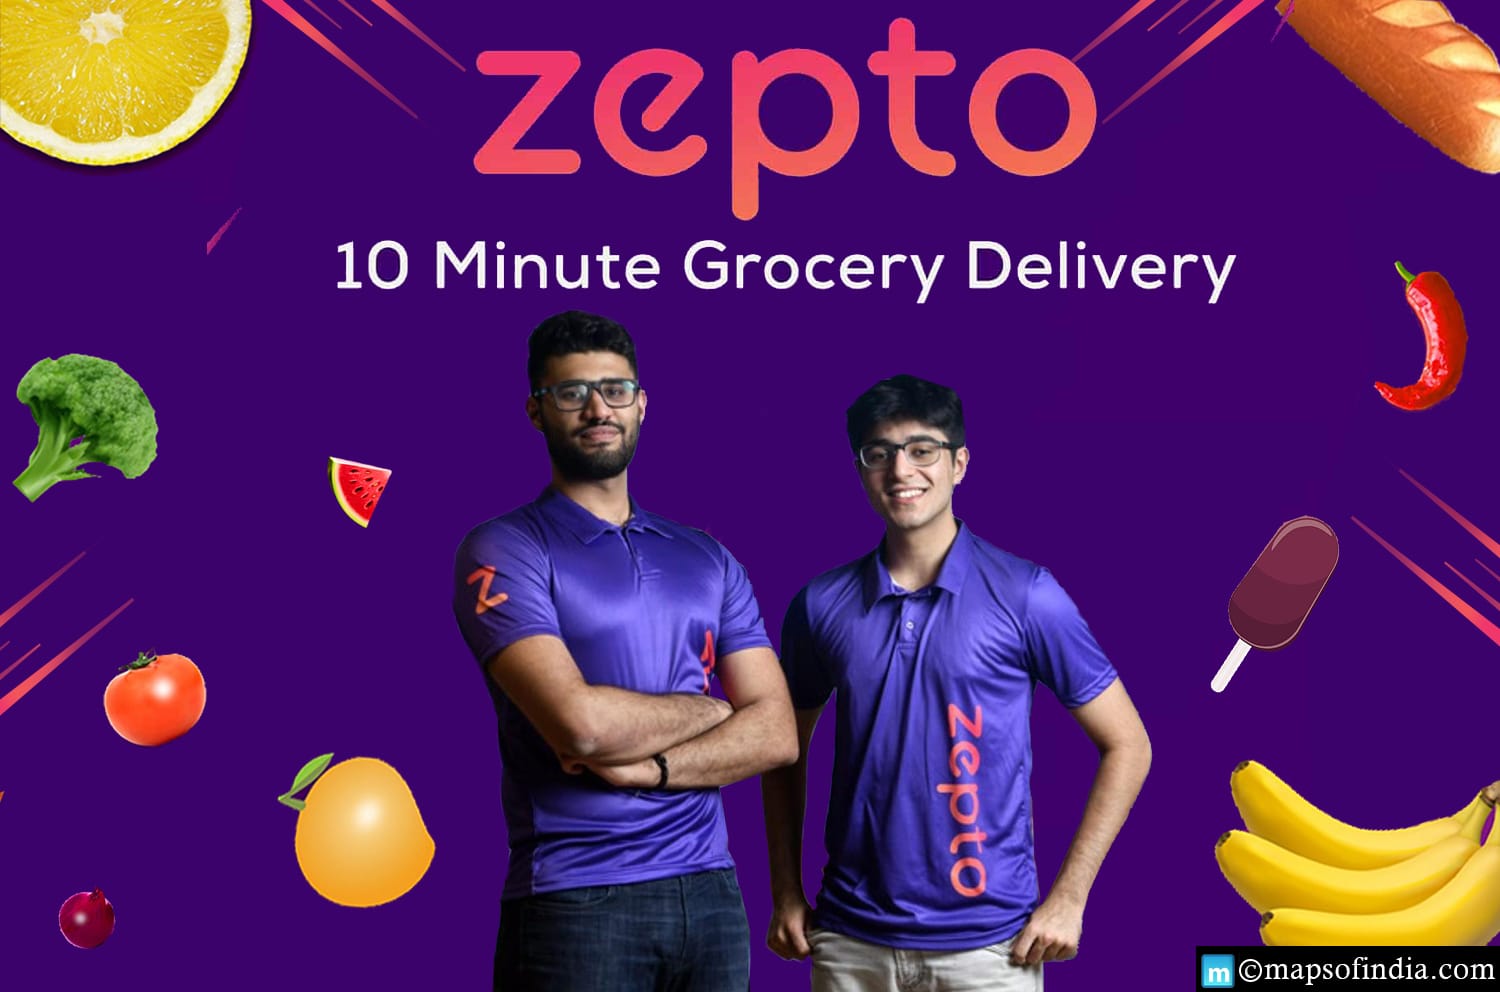 Two 19-year-old Stanford dropouts launch Zepto that disrupts grocery delivery space - Business